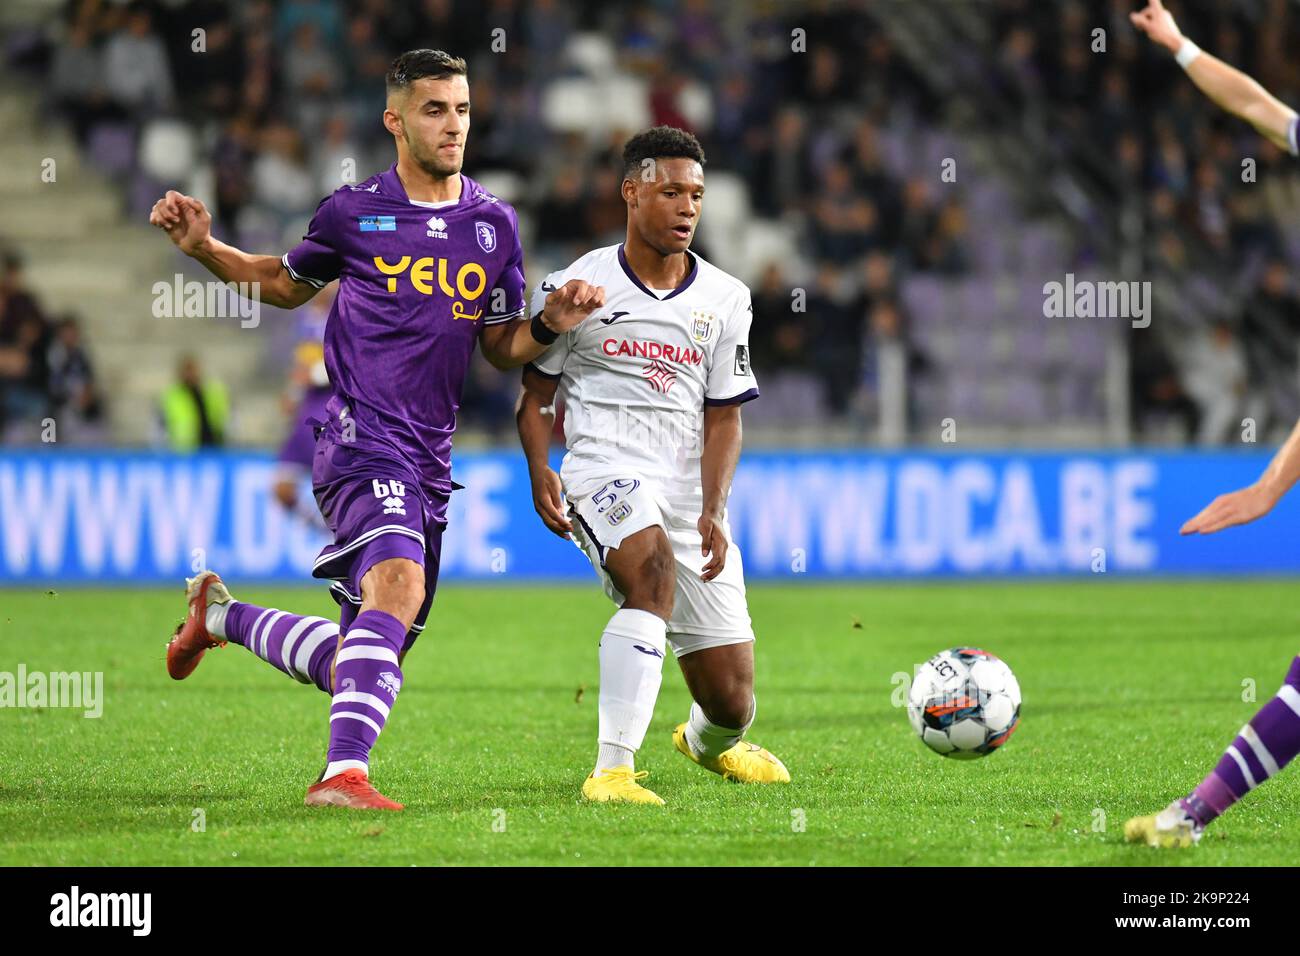 Beerschot's Apostolos Konstantopoulos and RSCA Futures' Duranville pictured in action during a soccer match between K. Beerschot V.A. and RSCA Futures, Saturday 29 October 2022 in Antwerp, on day 11 of the 2022-2023 'Challenger Pro League' first division of the Belgian championship. BELGA PHOTO JILL DELSAUX Credit: Belga News Agency/Alamy Live News Stock Photo